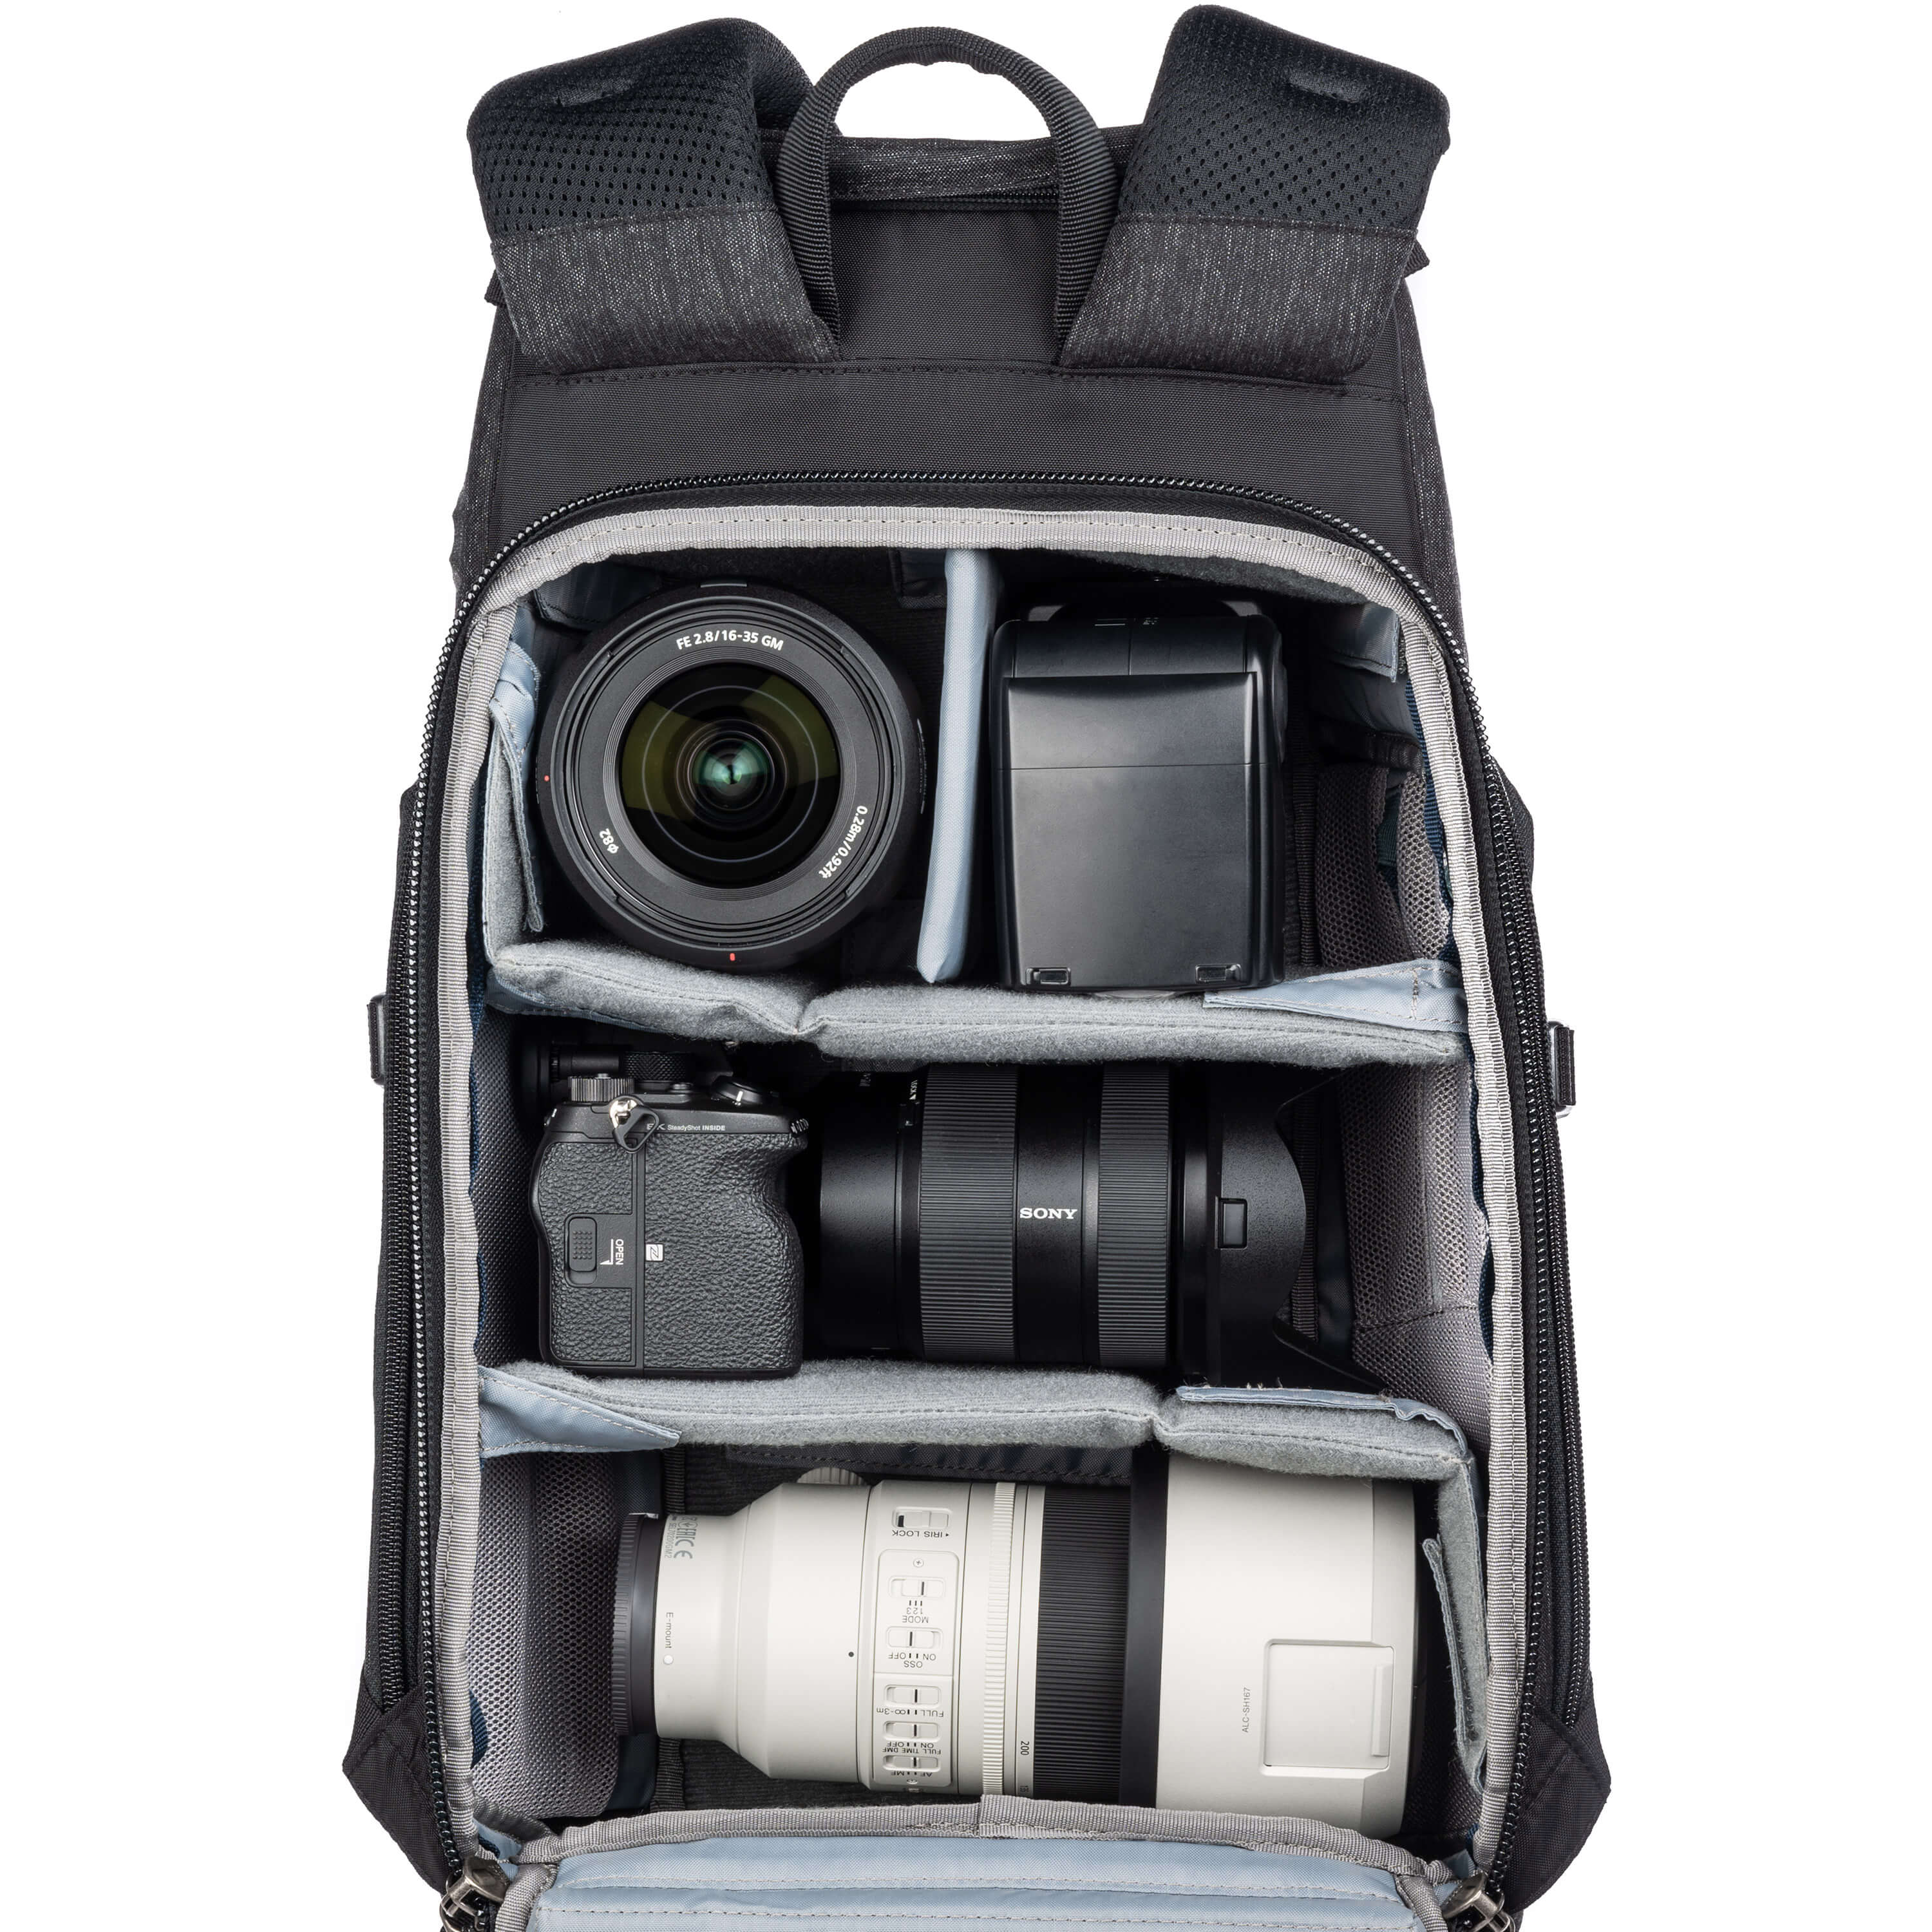 Urban Access 13 Camera Backpack for DSLR or Mirrorless fits 13